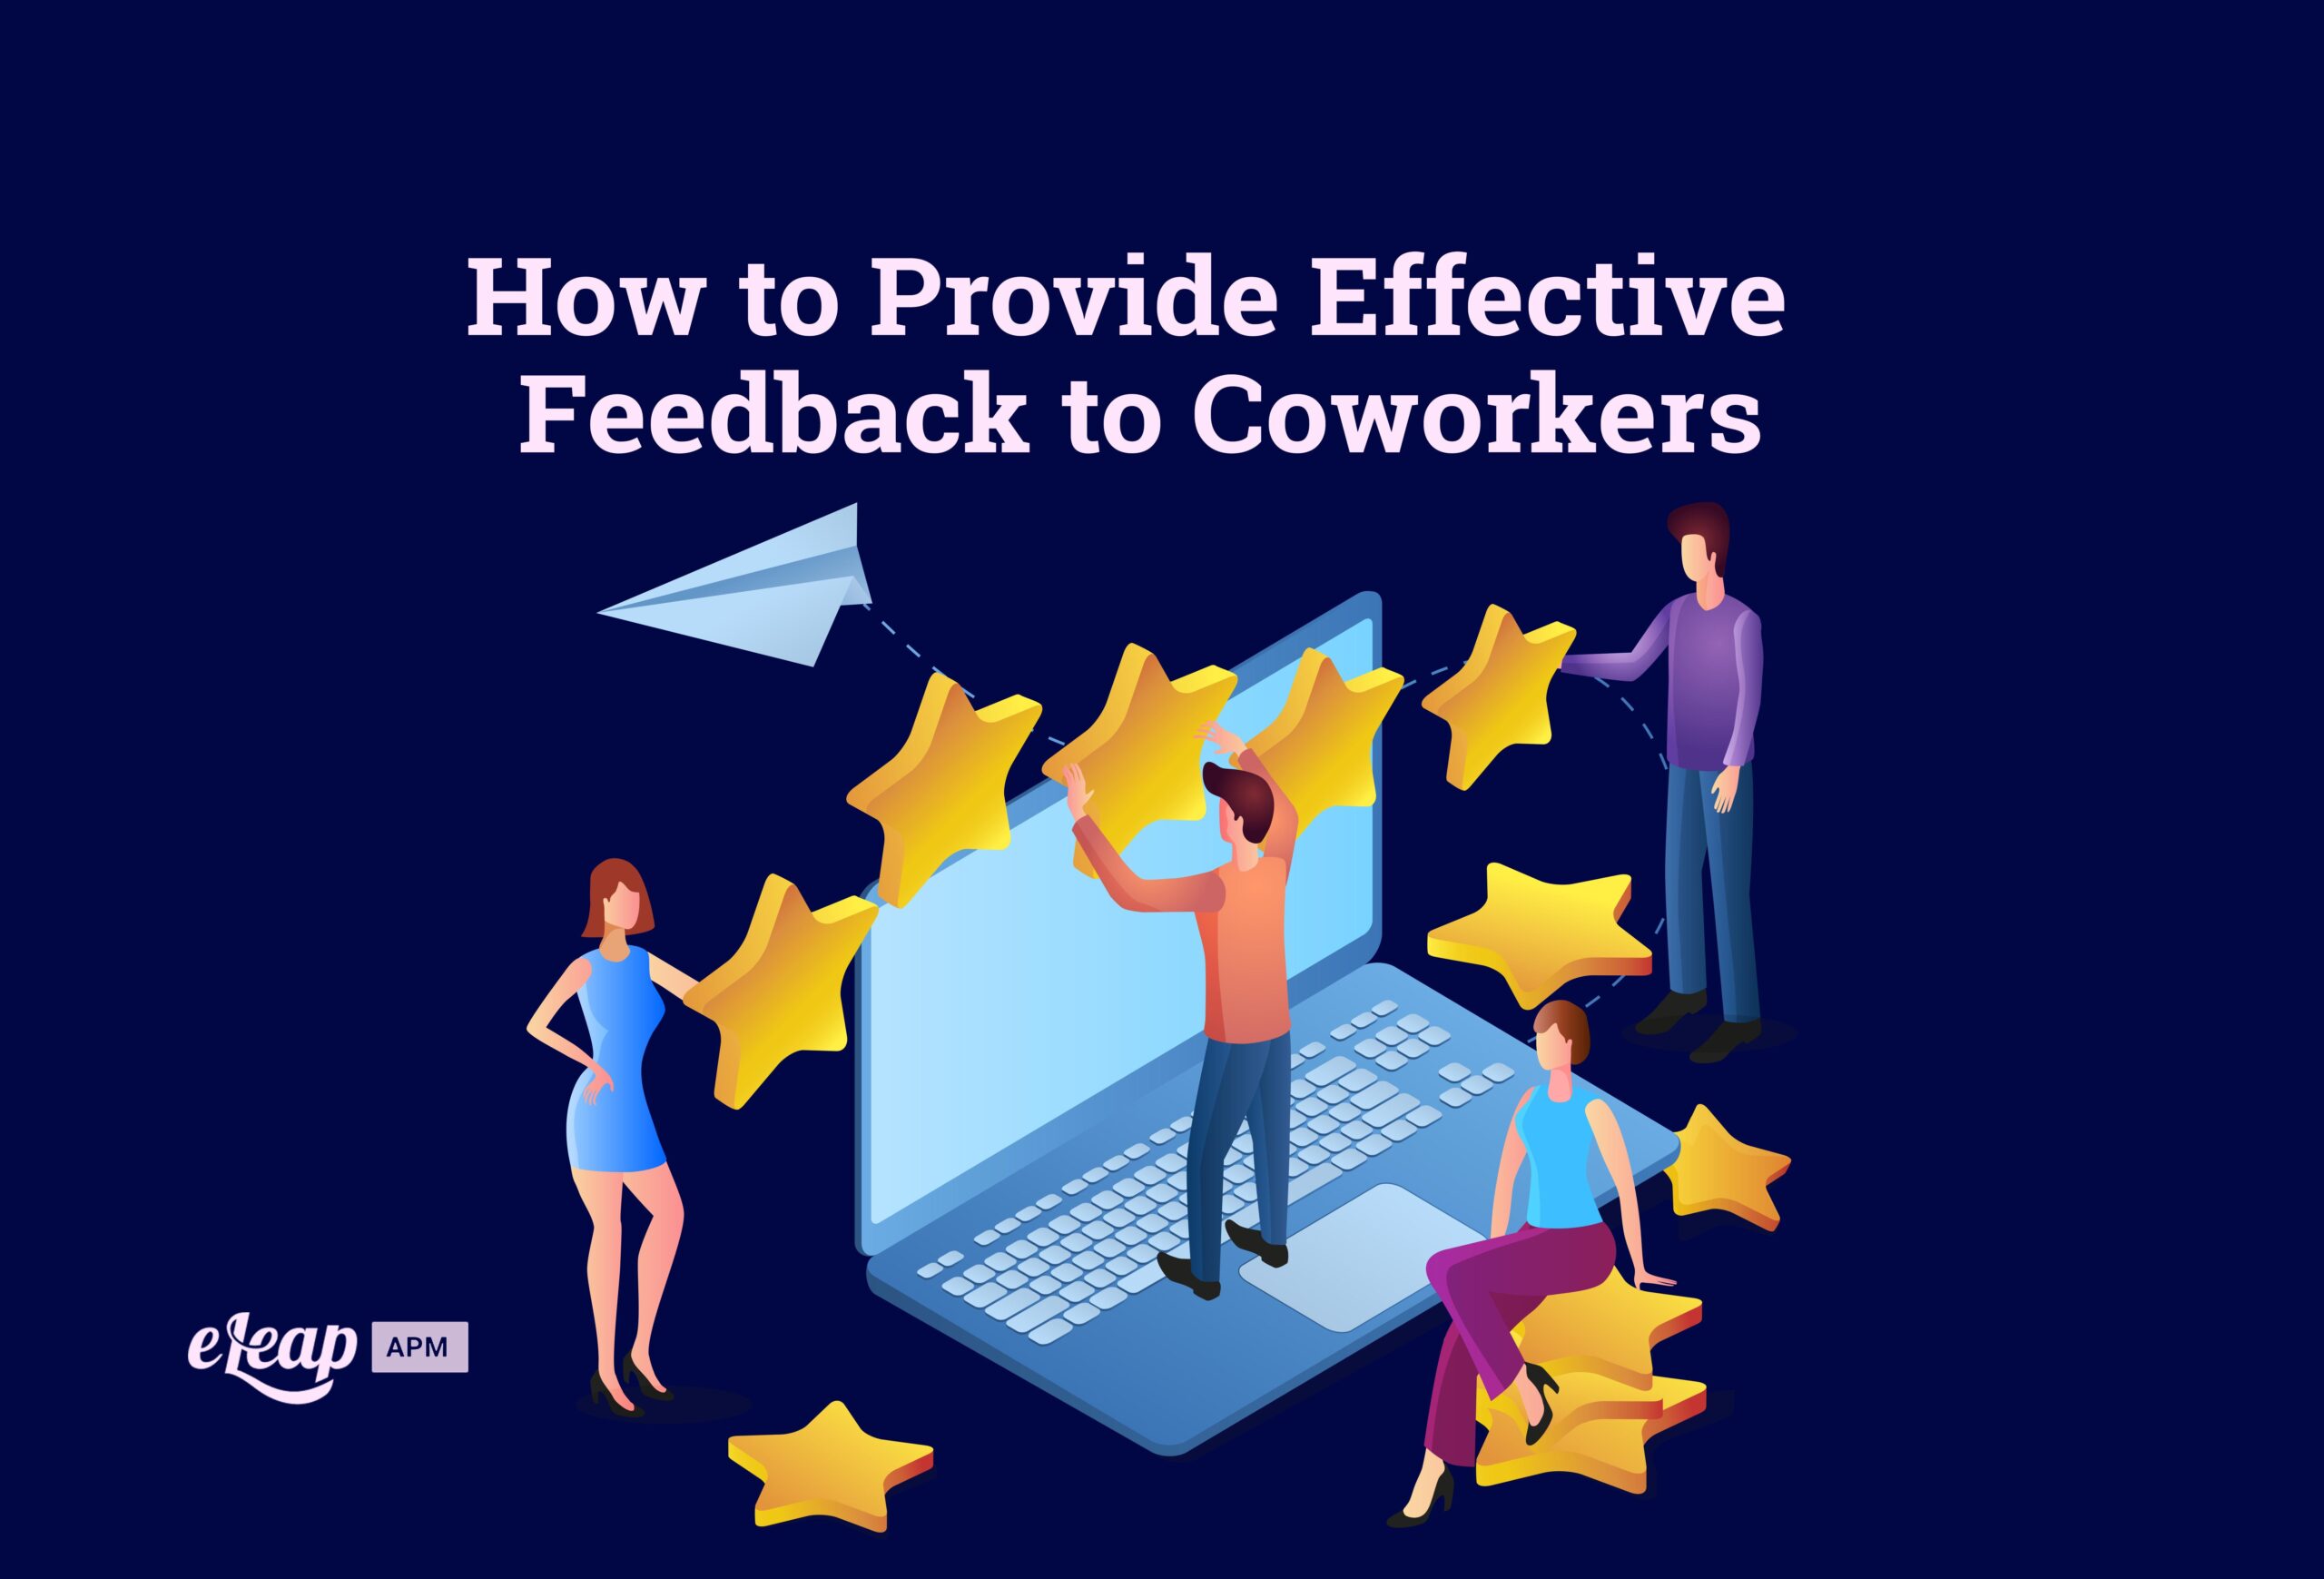 How to Provide Effective Feedback to Coworkers